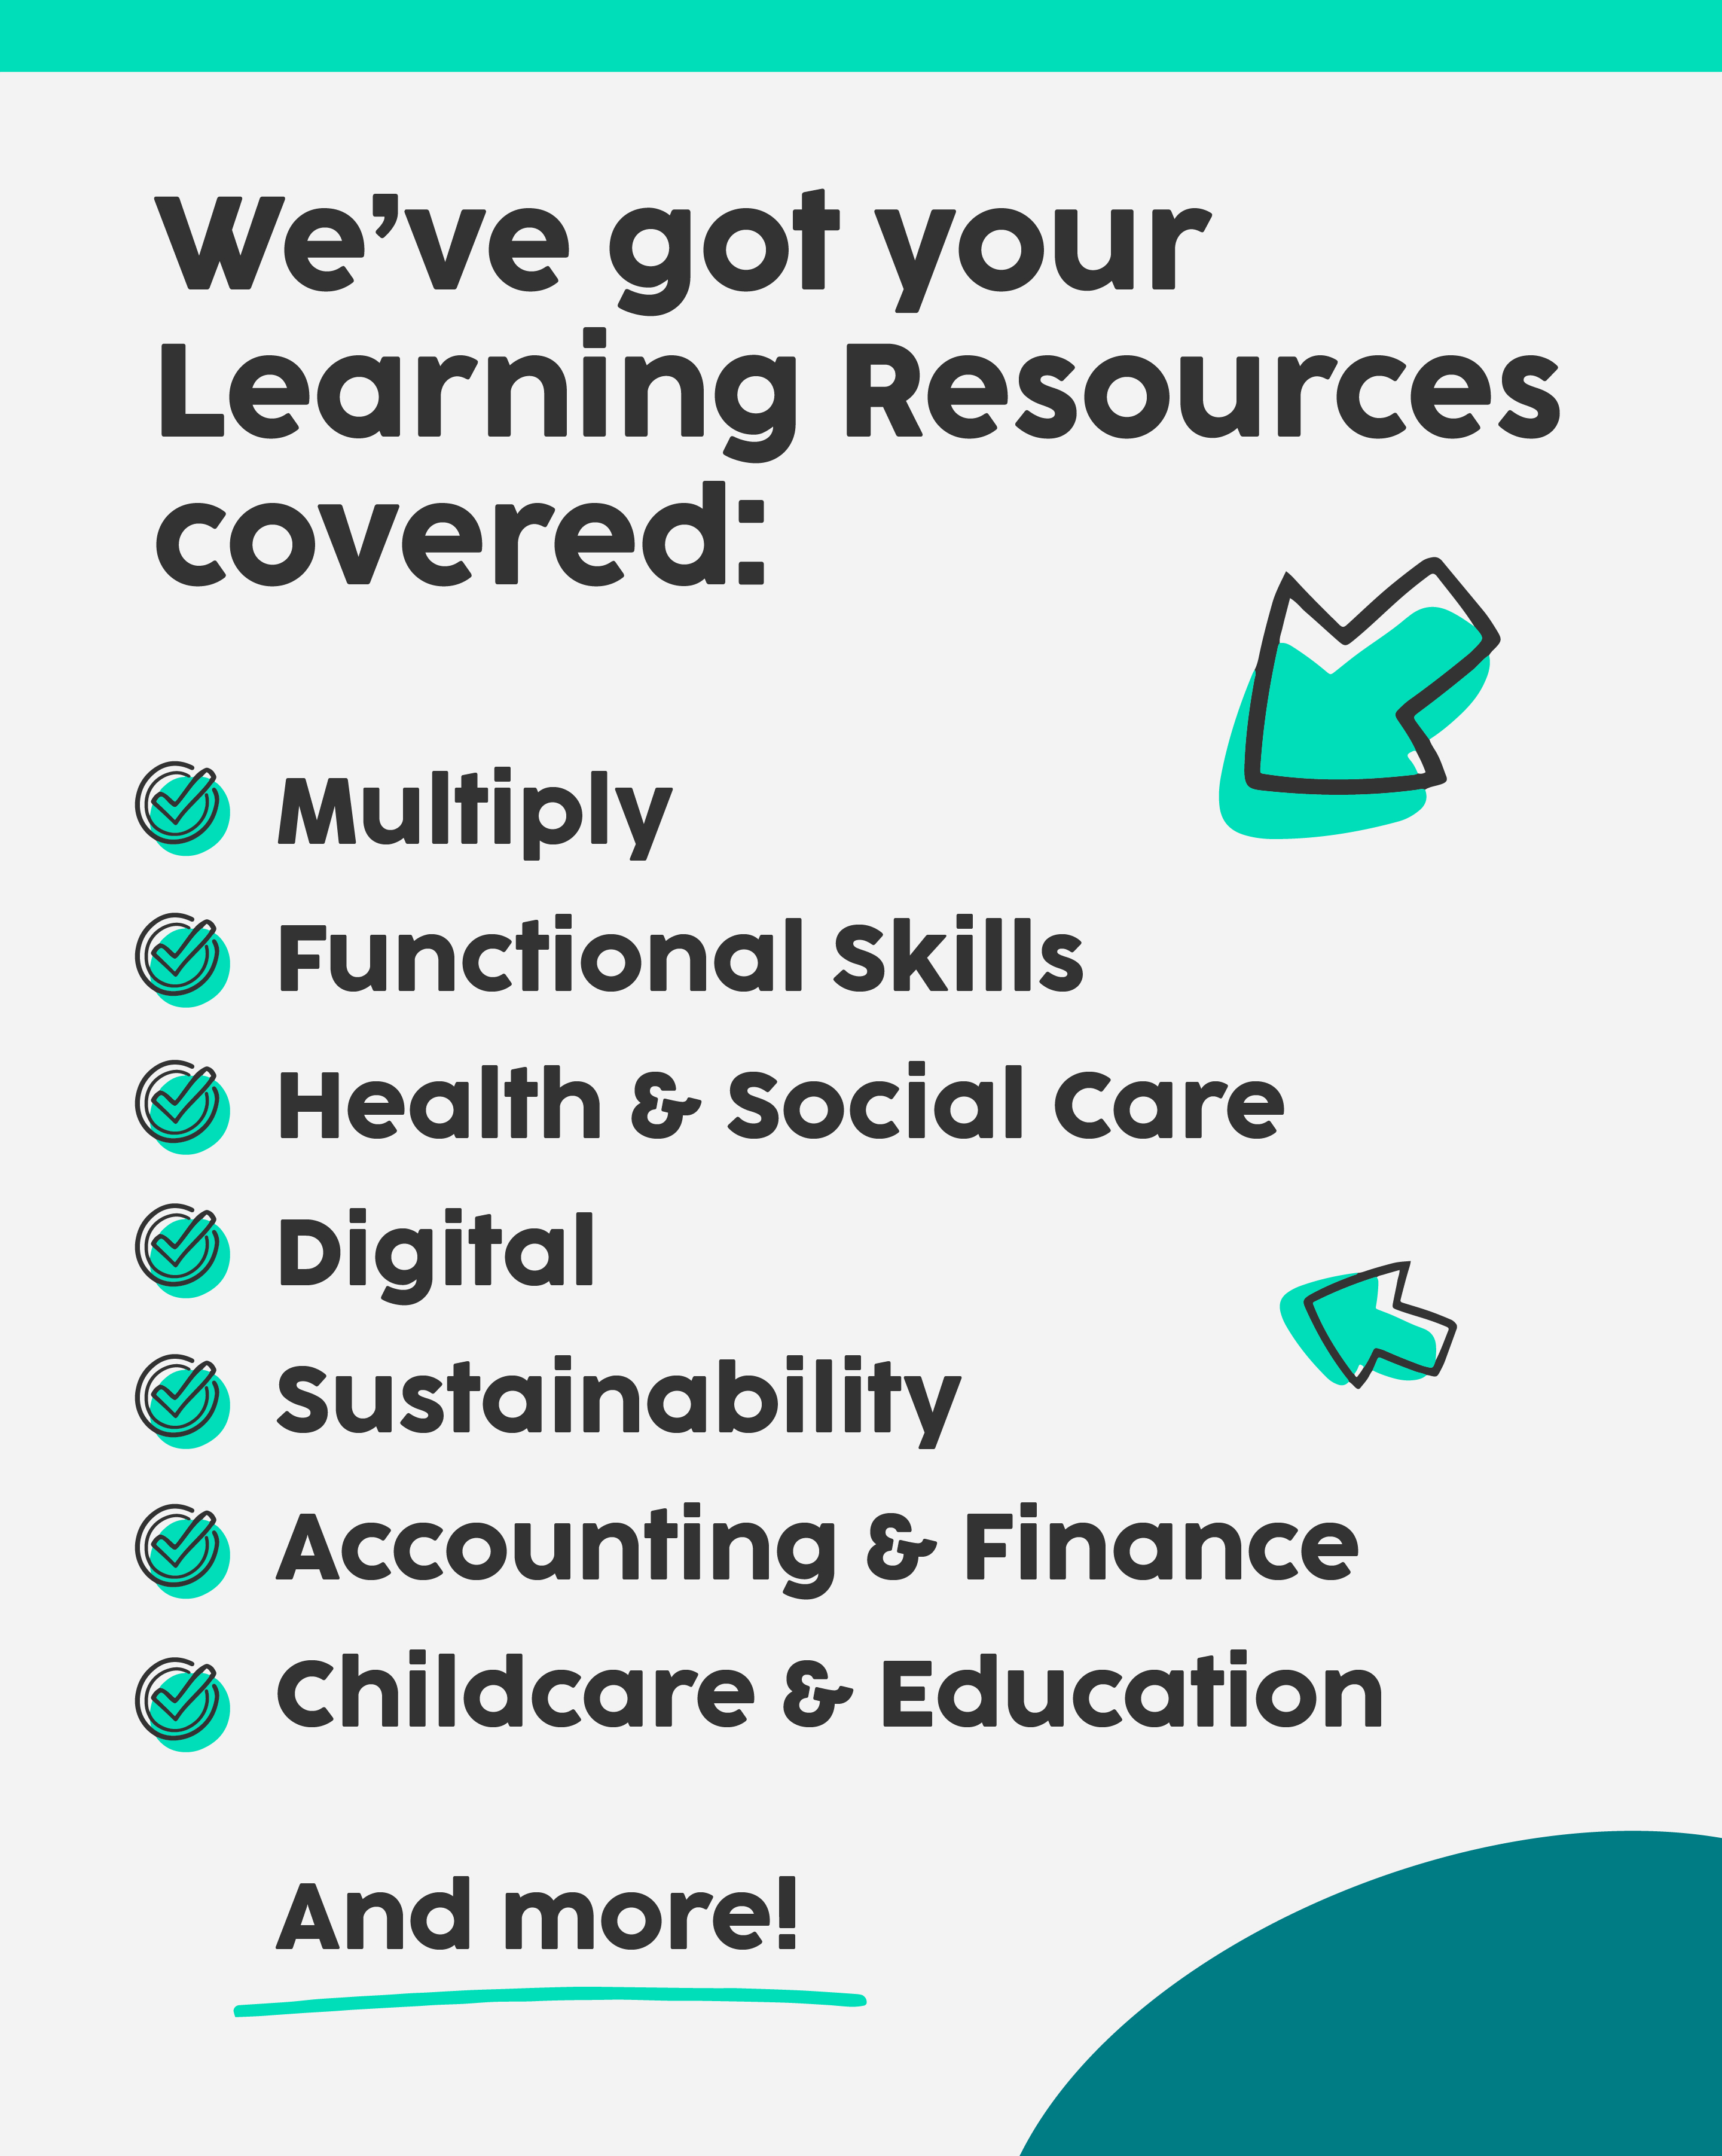 We’ve got your Learning Resources covered!  Multiply Functional Skills Health & Social Care Digital Sustainability Accounting & Finance Childcare & Education And more!